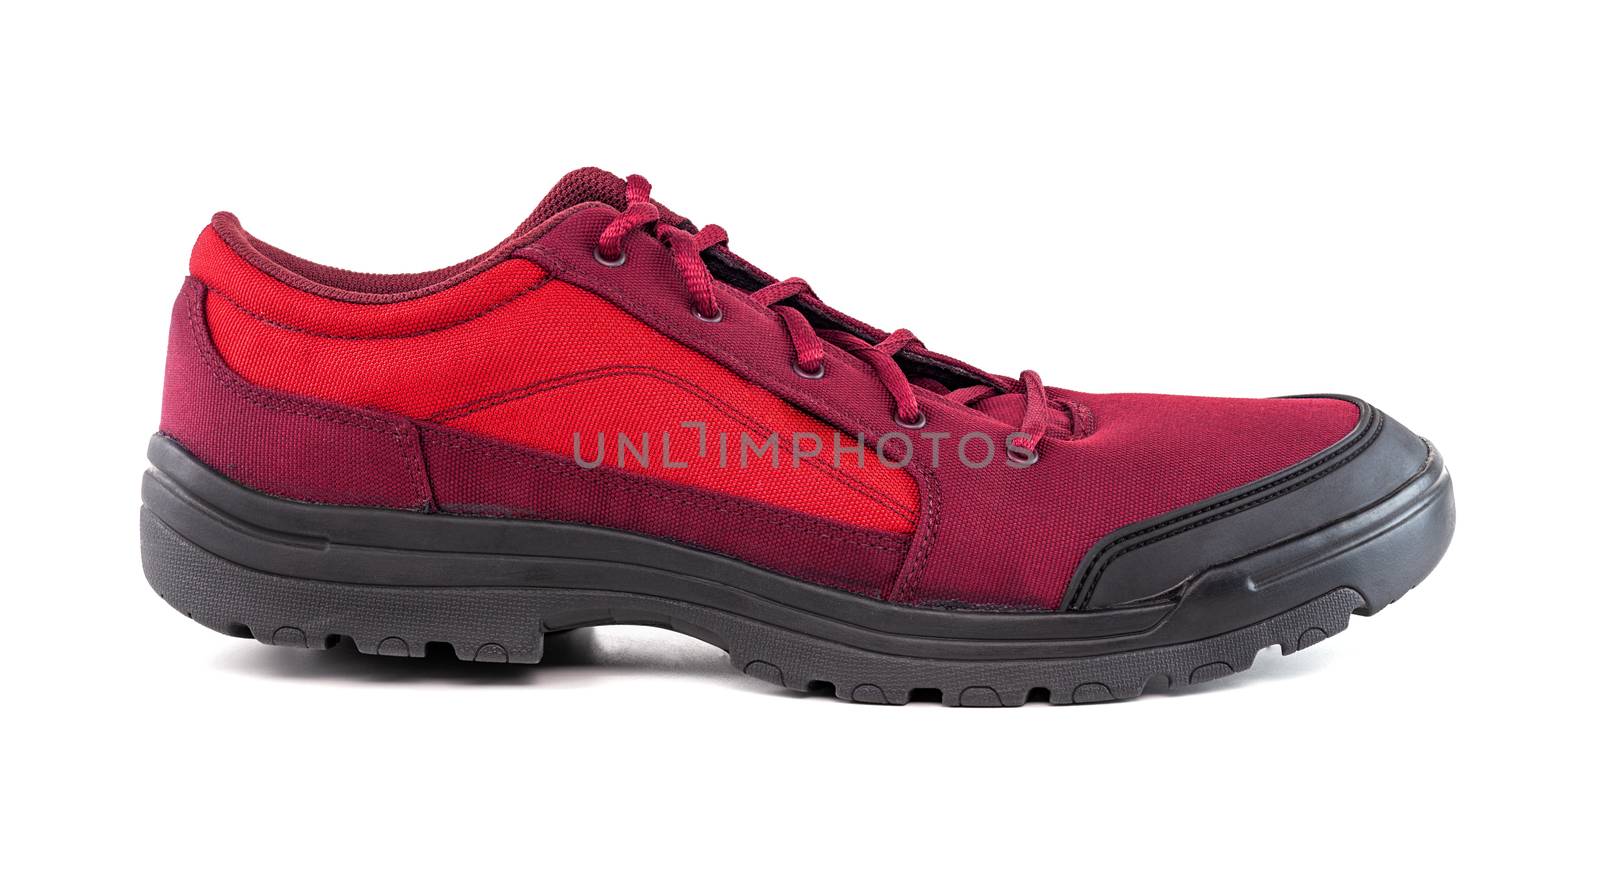 right cheap red hiking or hunting shoe isolated on white background.